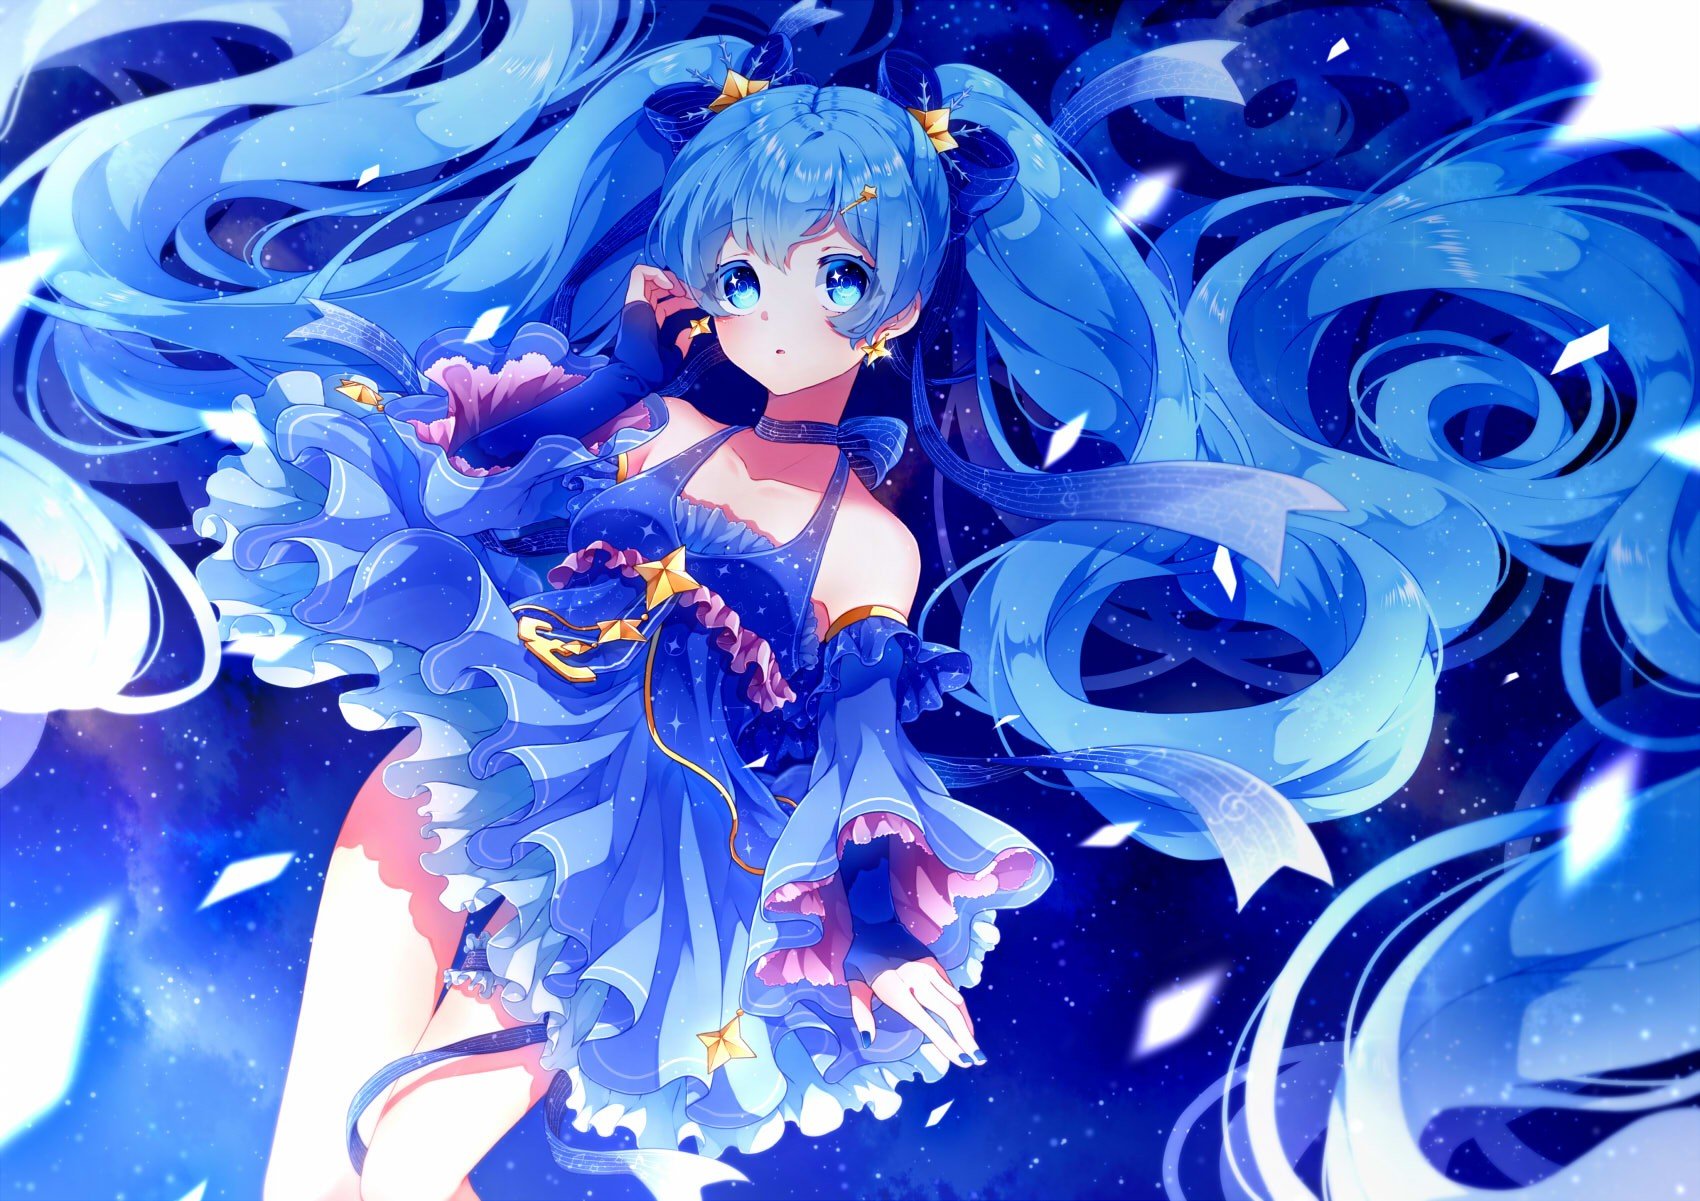 Blue-haired anime girl in prom dress - wide 10